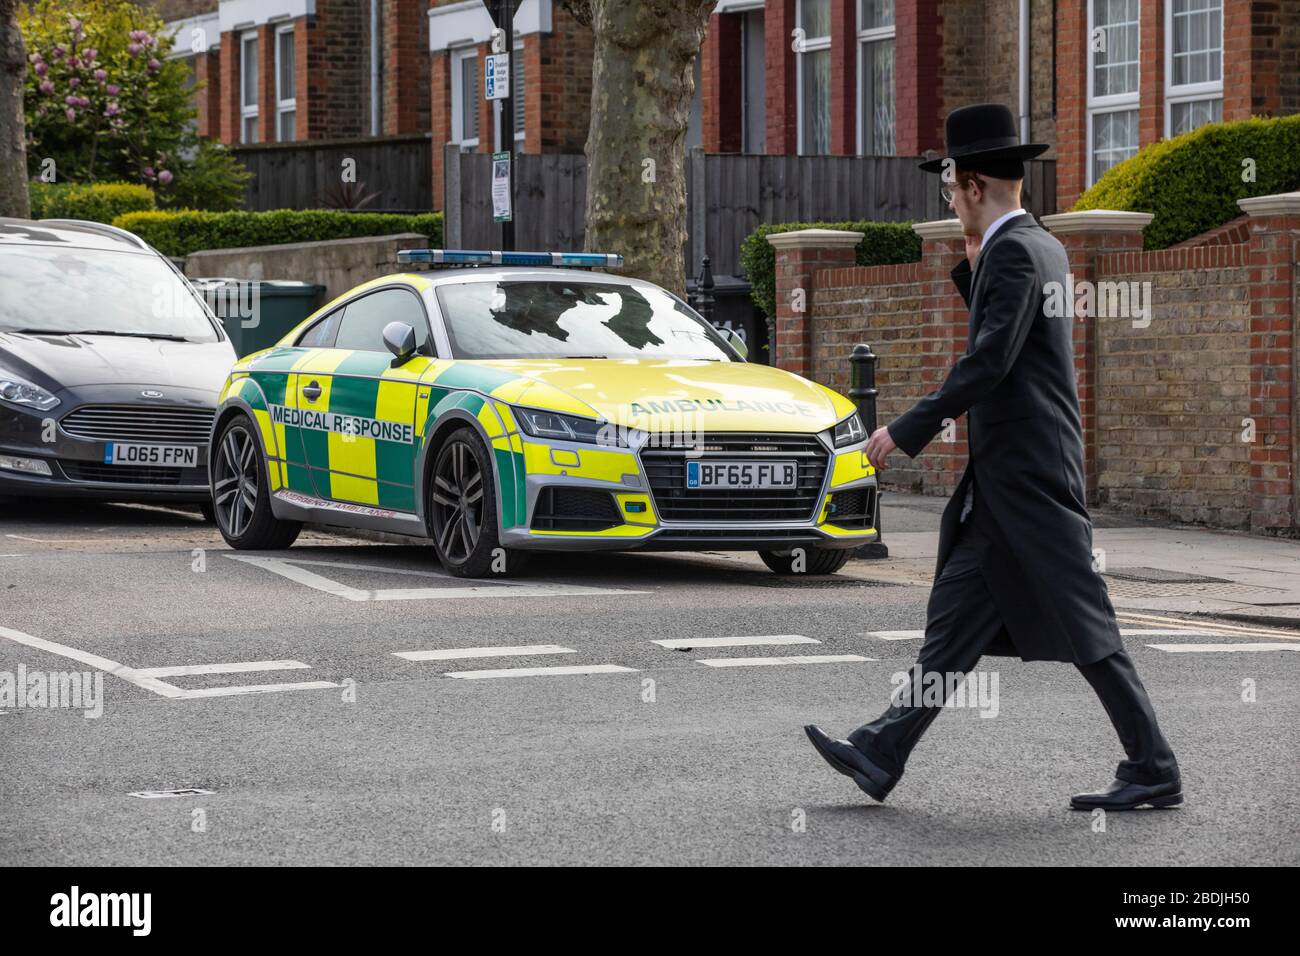 Ultra-Orthodox Jew in the Jewish Community of Stamford Hill passing an ambulance ahead of the Passover celebrations during the COVID-19 lockdown UK Stock Photo